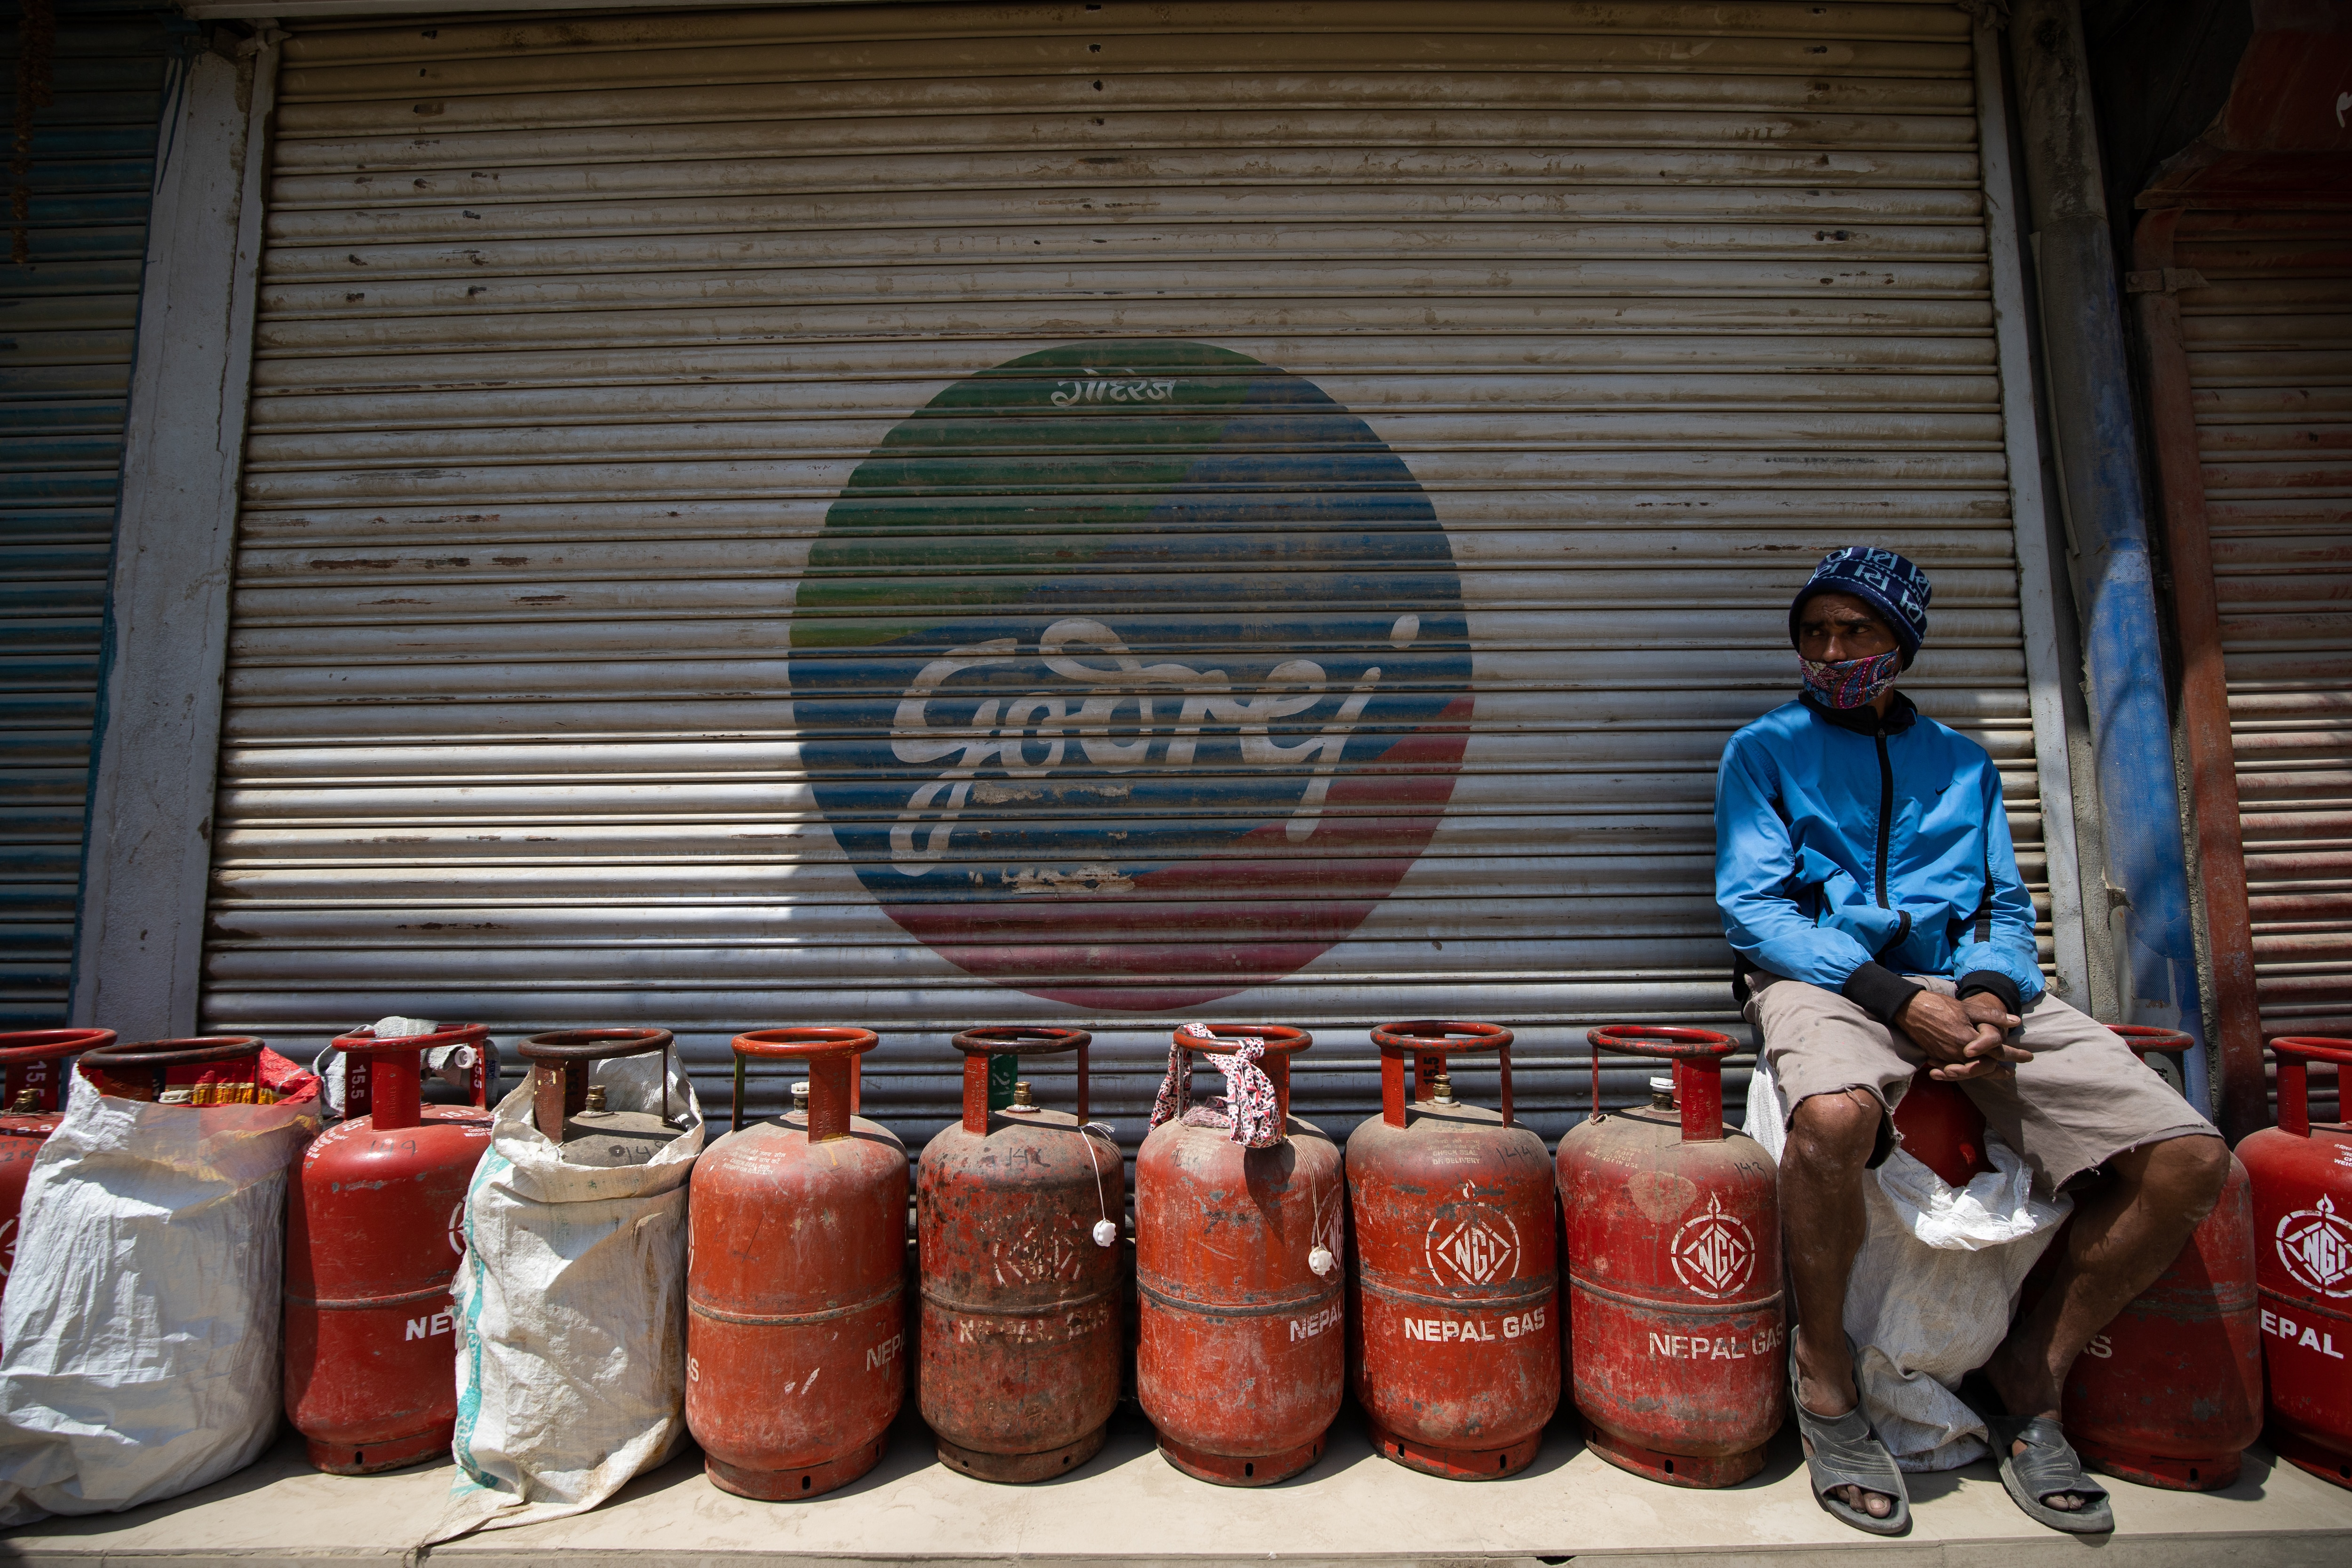 A man wearing a face mask as a preventive measure, seats on LPG cylinders as he waits in a queue, during the ninth day of the nationwide lockdown..Amid concerns about the spread of corona virus (COVID-19), the government of Nepal has extended the nationwi